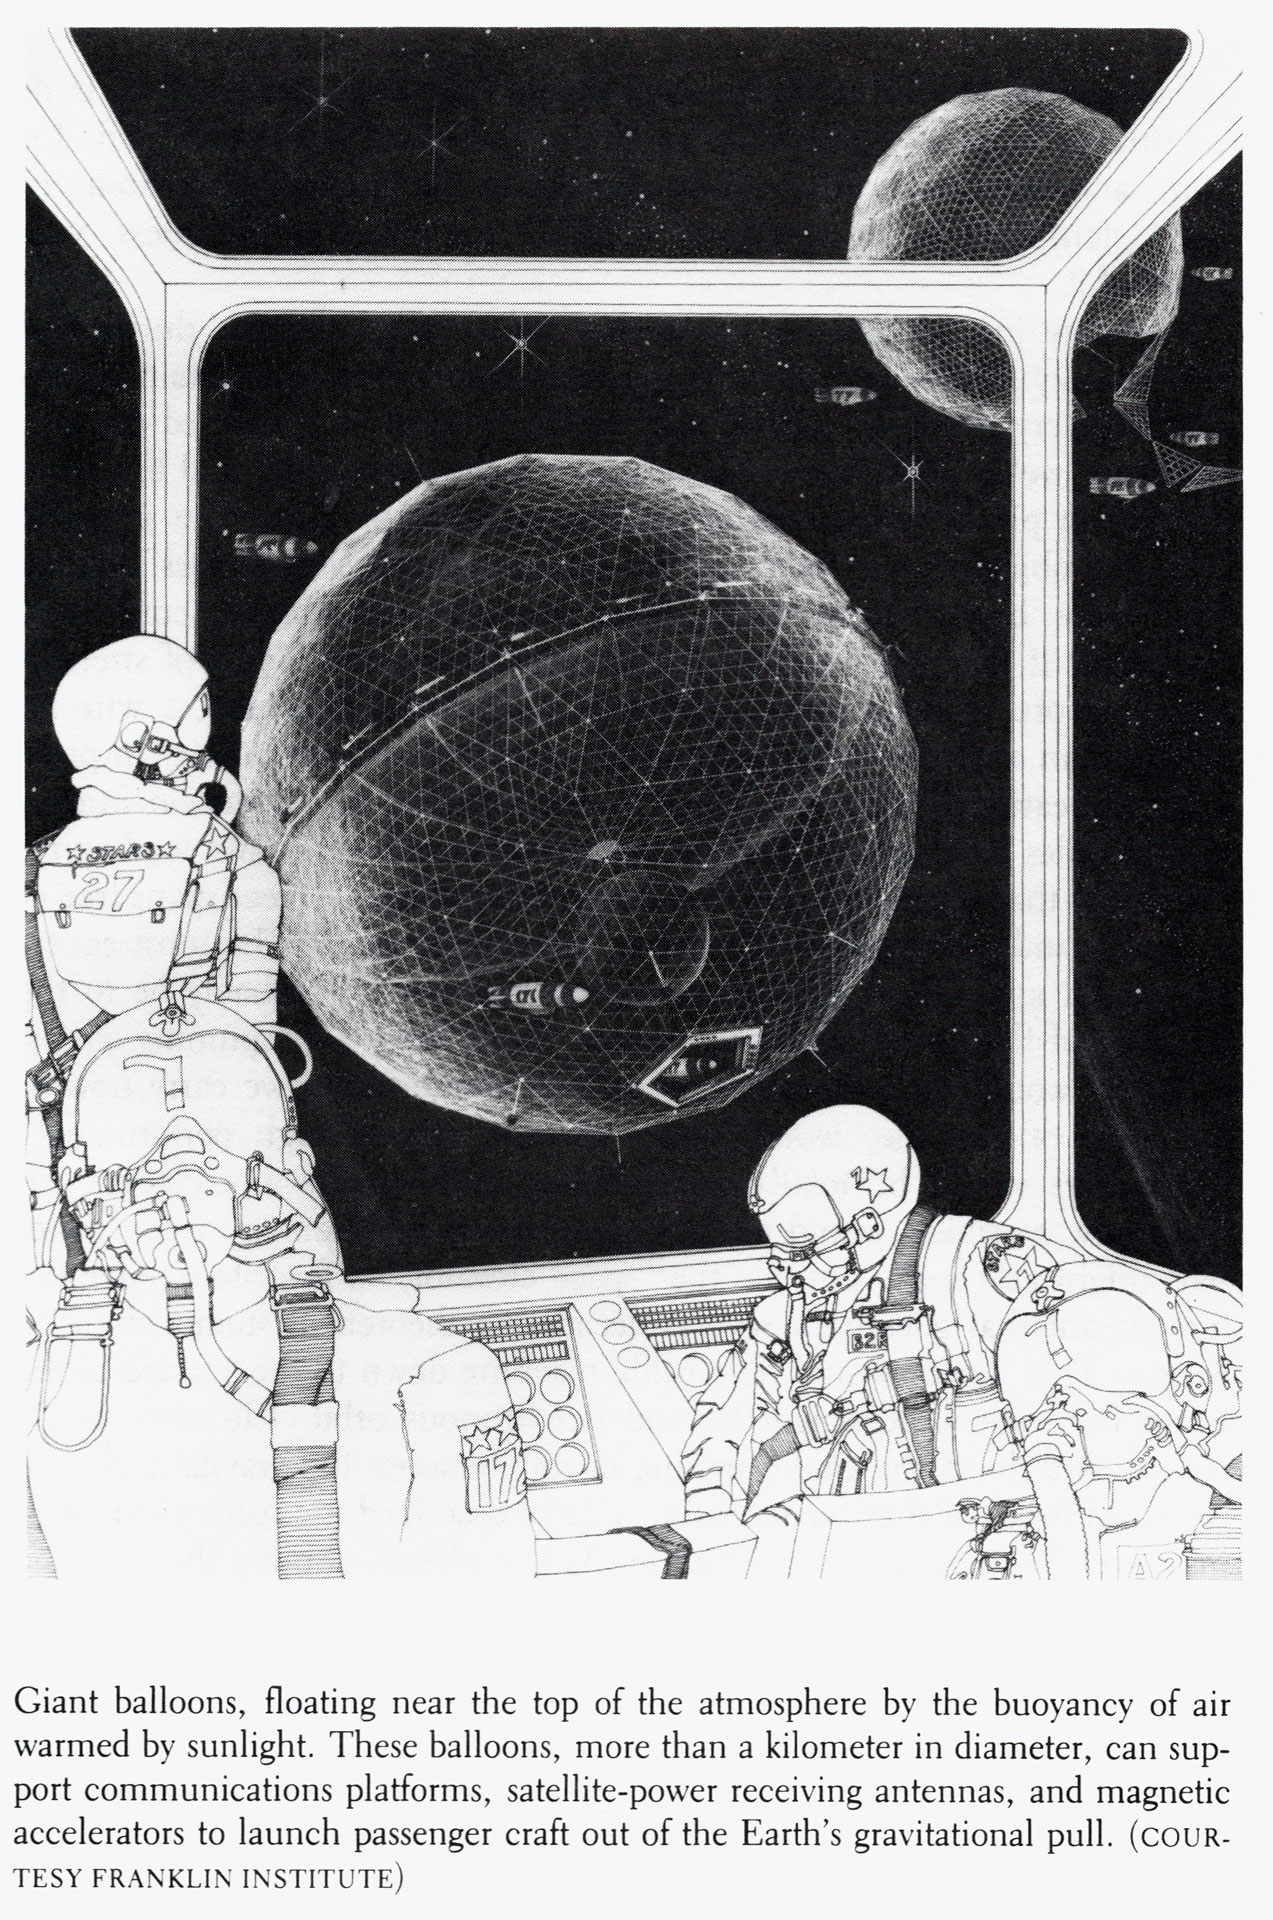 Franklin Research Institute Concept Art for STARS. From Gerard K. O'Neill's 1981 book 2081